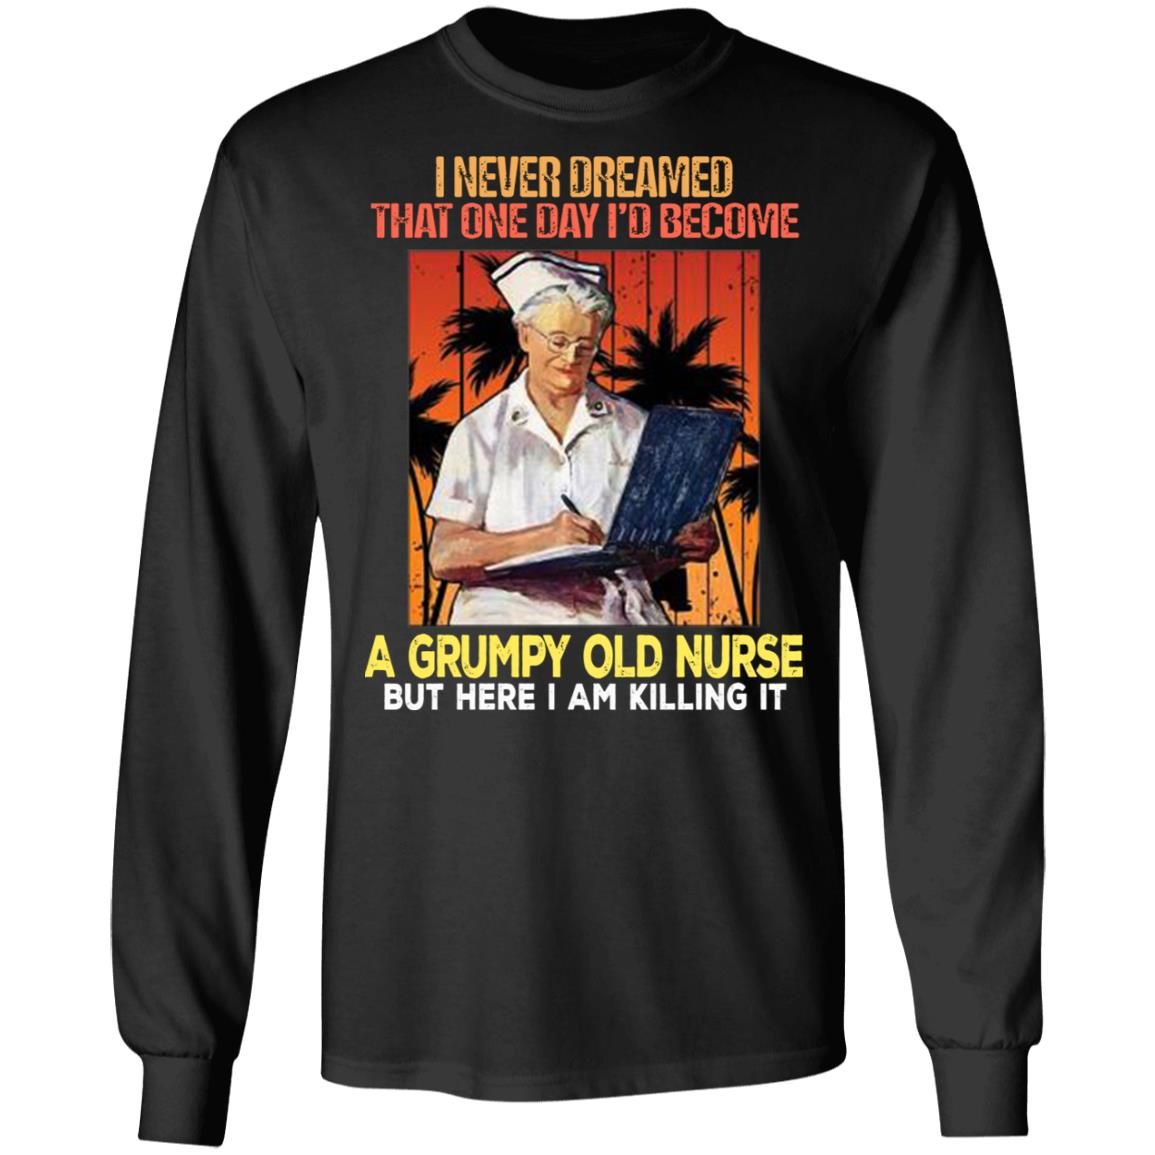 ‘I never dreamed that one day I’d become a grumpy old nurse but the I am killing it vintage shirt